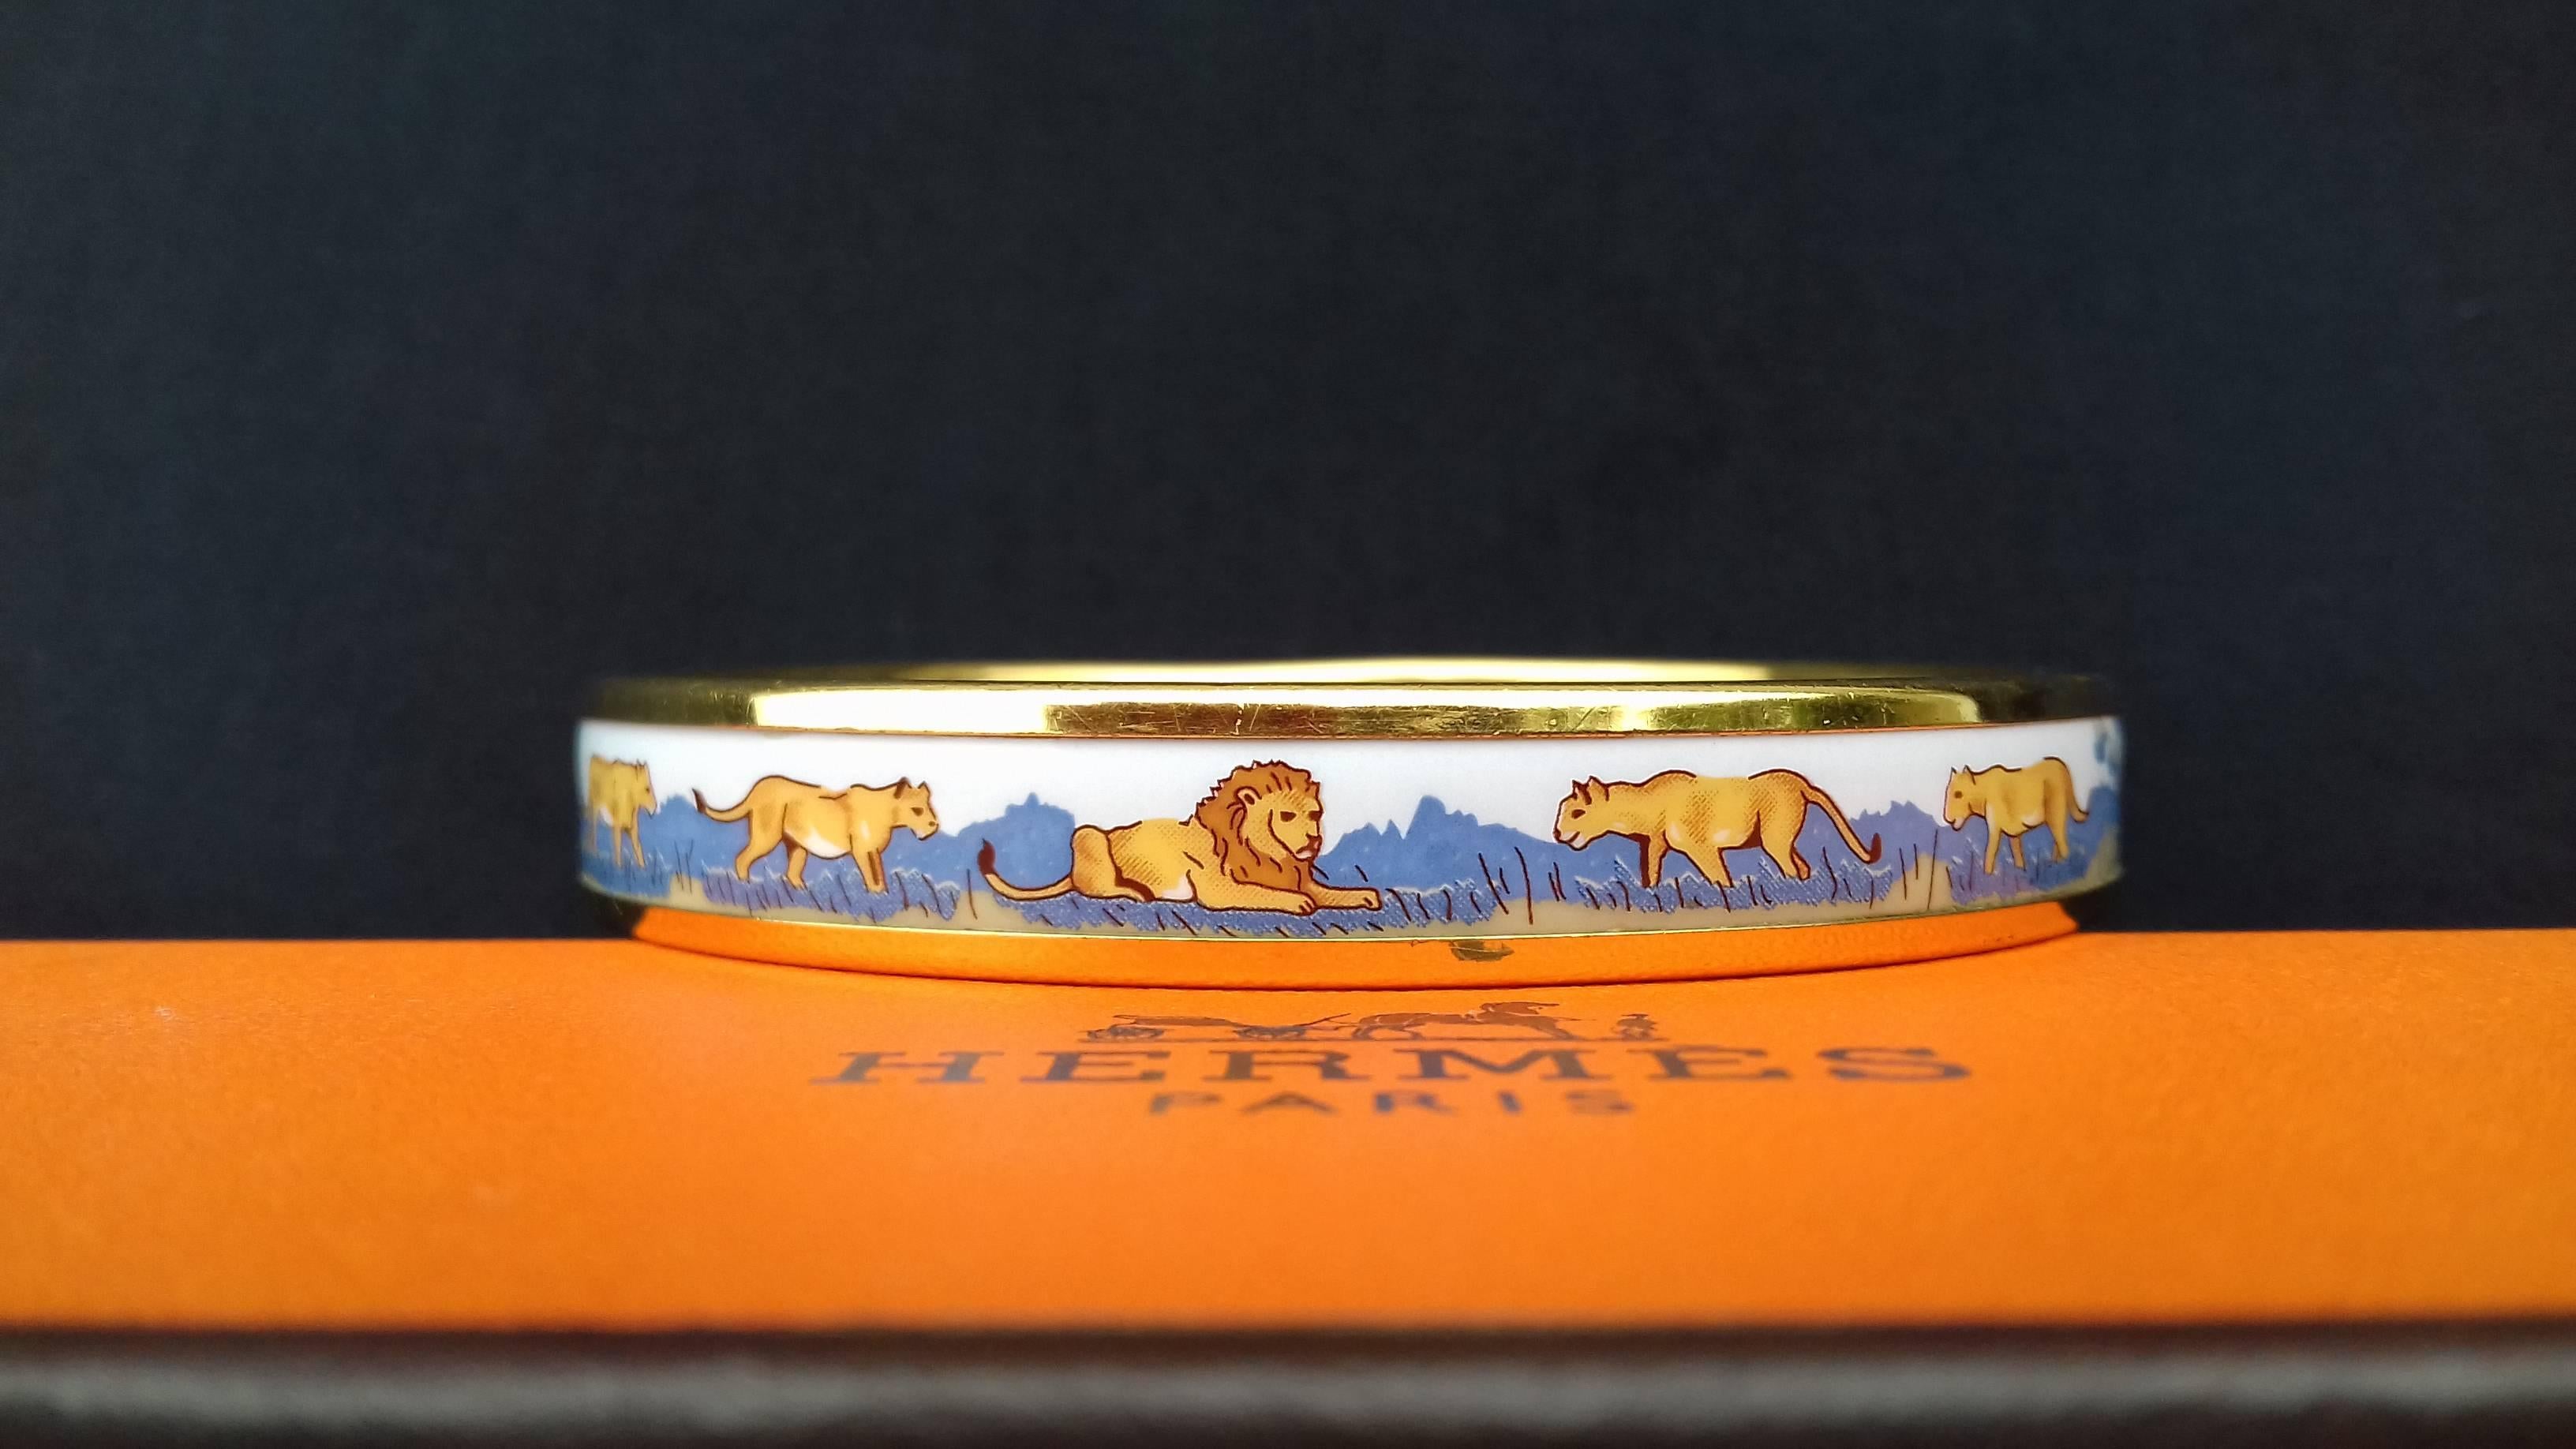 Hard to find Authentic Hermès Bracelet

Pattern: Lions and lionesses in Savannah

Made in Austria + C

Made of Printed Enamel and Gold Plated Hardware

Colorways: White, Blue, Green, Fauve

